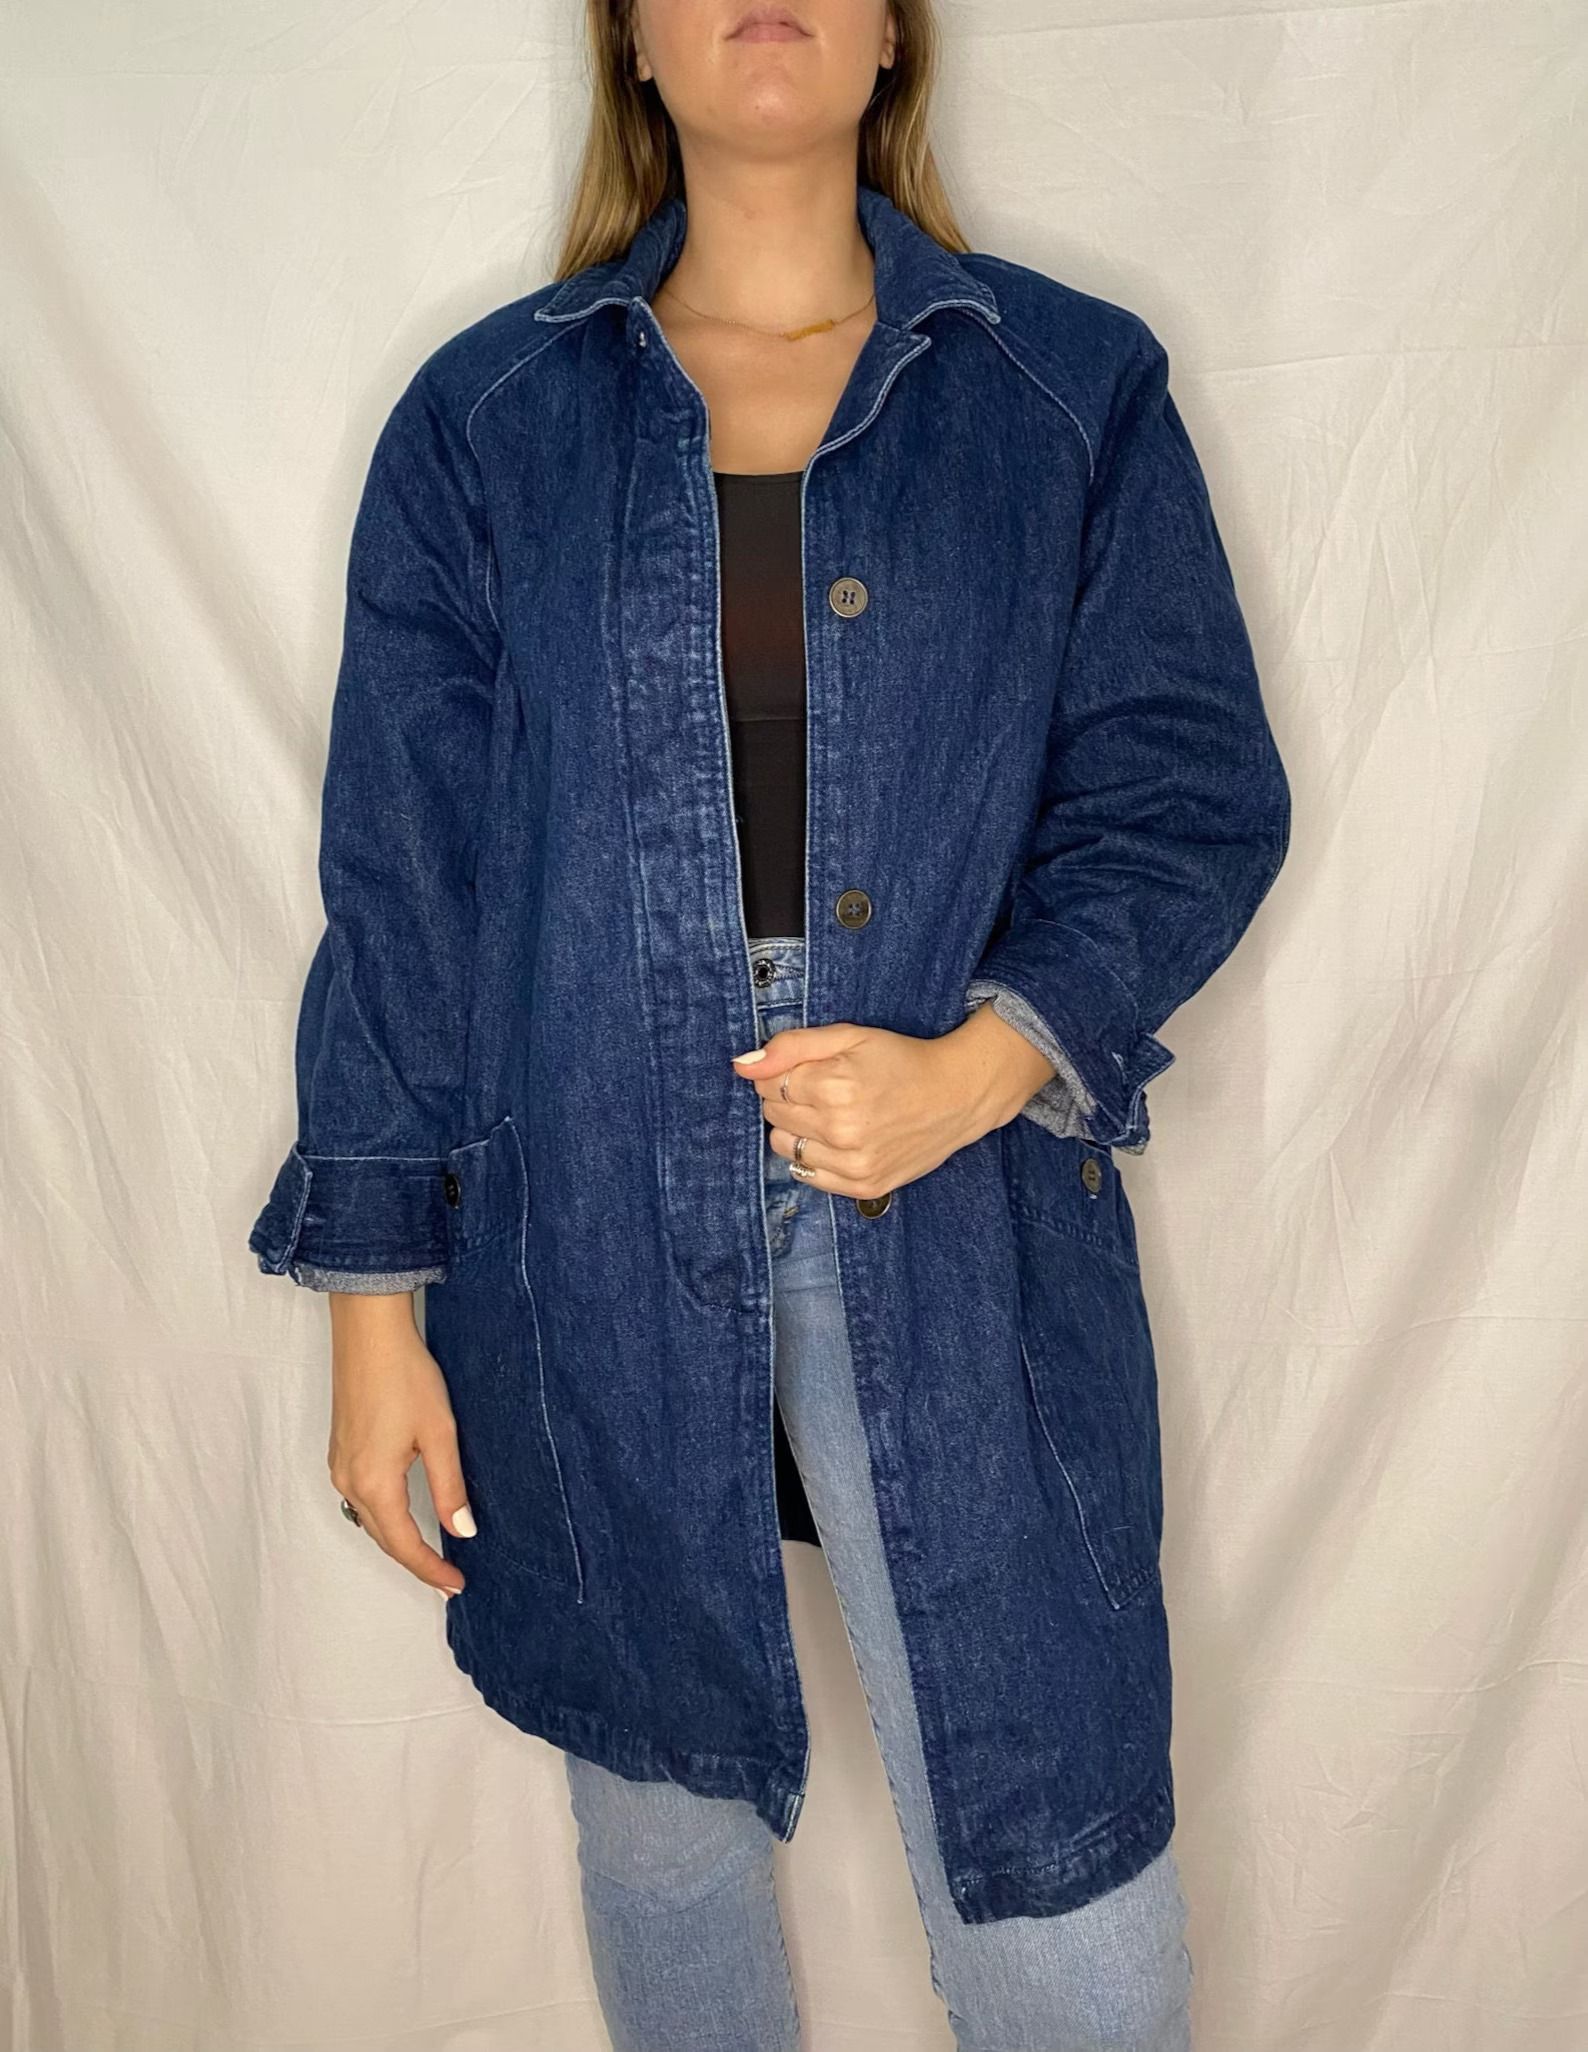 Jackets for women: Get The Best Deals On Denim Jackets For Women - The  Economic Times